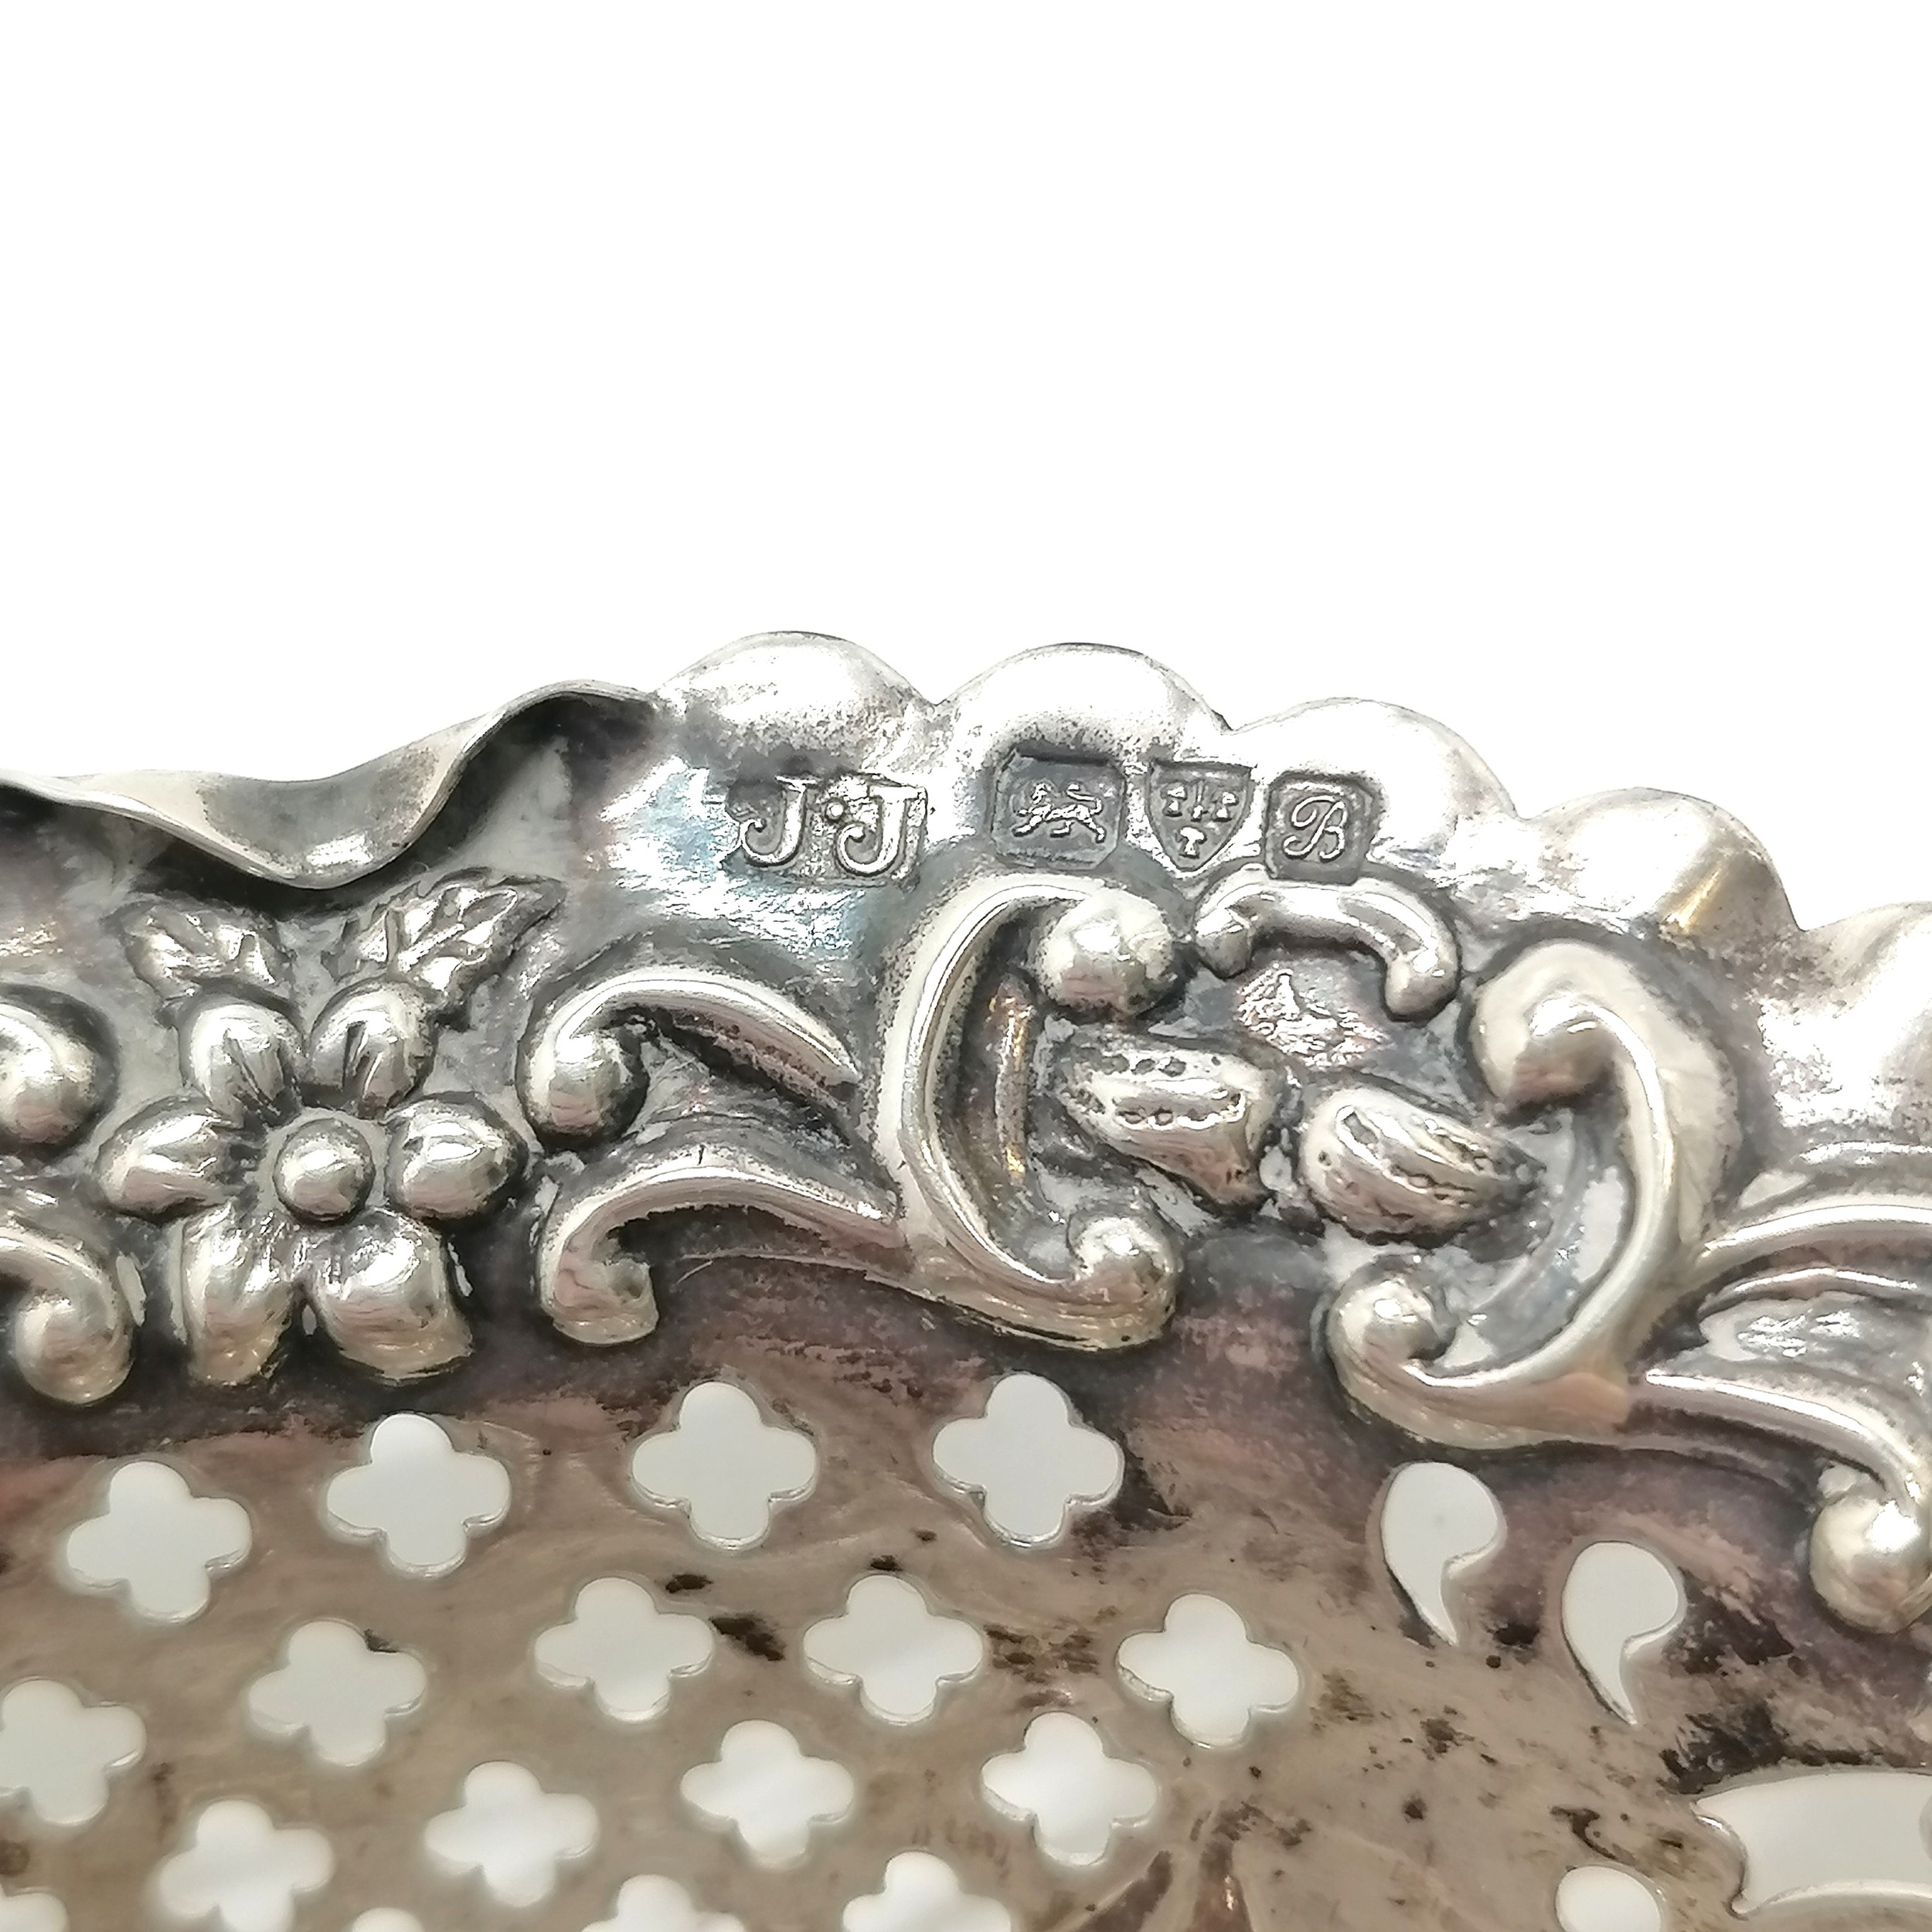 1902 Chester silver pierced bonbon dish with cherub detail by Jay, Richard Attenborough & Co - - Image 2 of 3